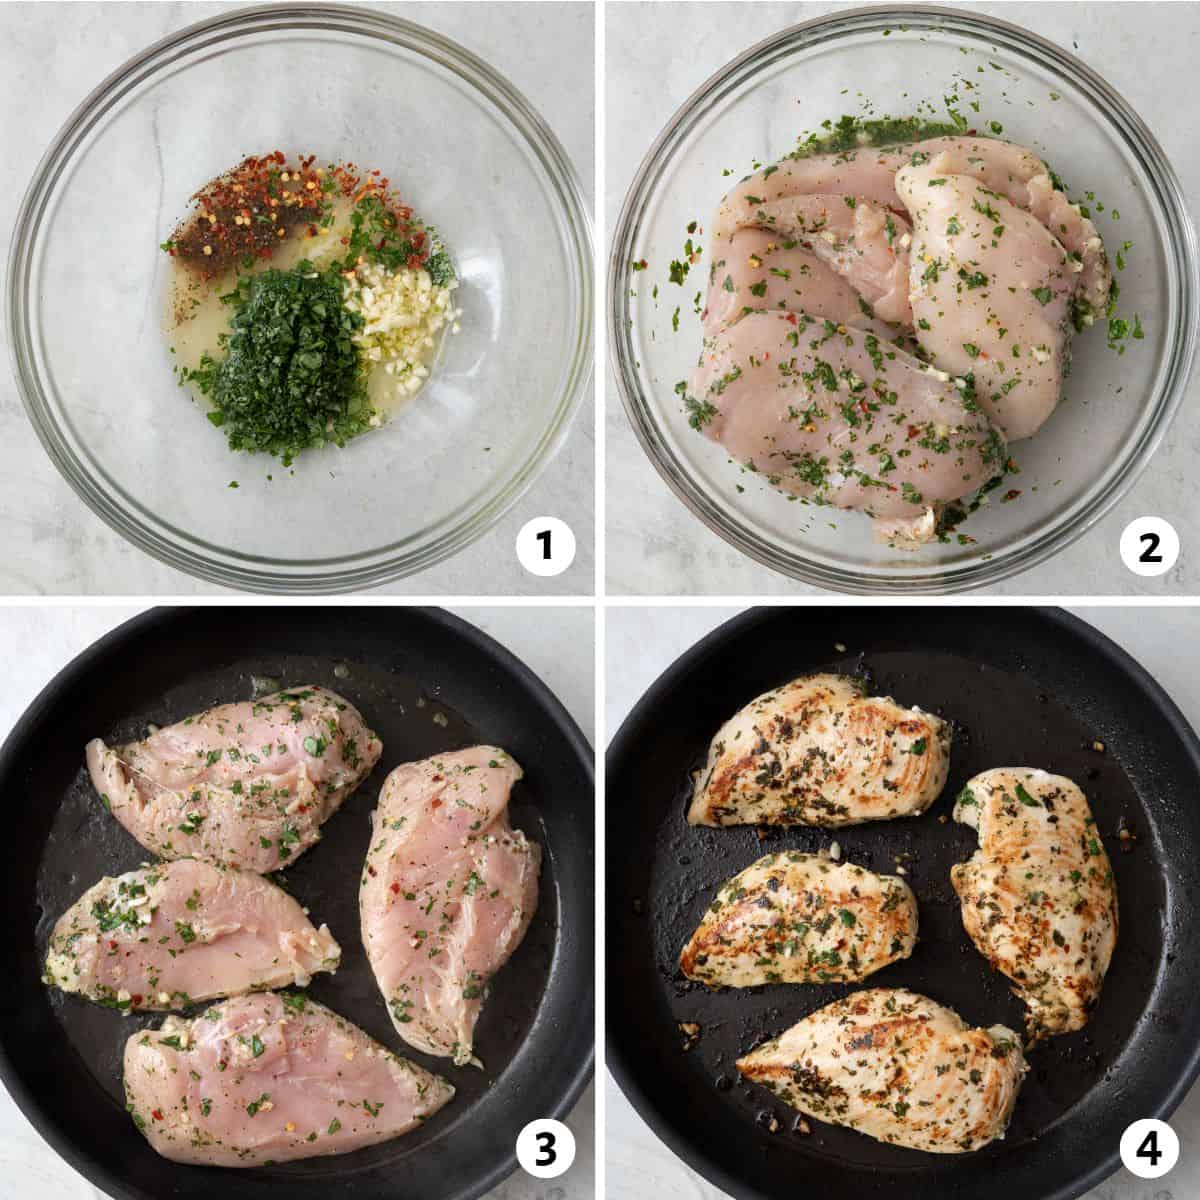 4 image collage making recipe: 1- cilantro, garlic, lemon juice, oil, and seasoning in a bowl before combing, 2- chicken tossed in marinade, 3- chicken breast in a skillet before cooking, 4- chicken after cooking.